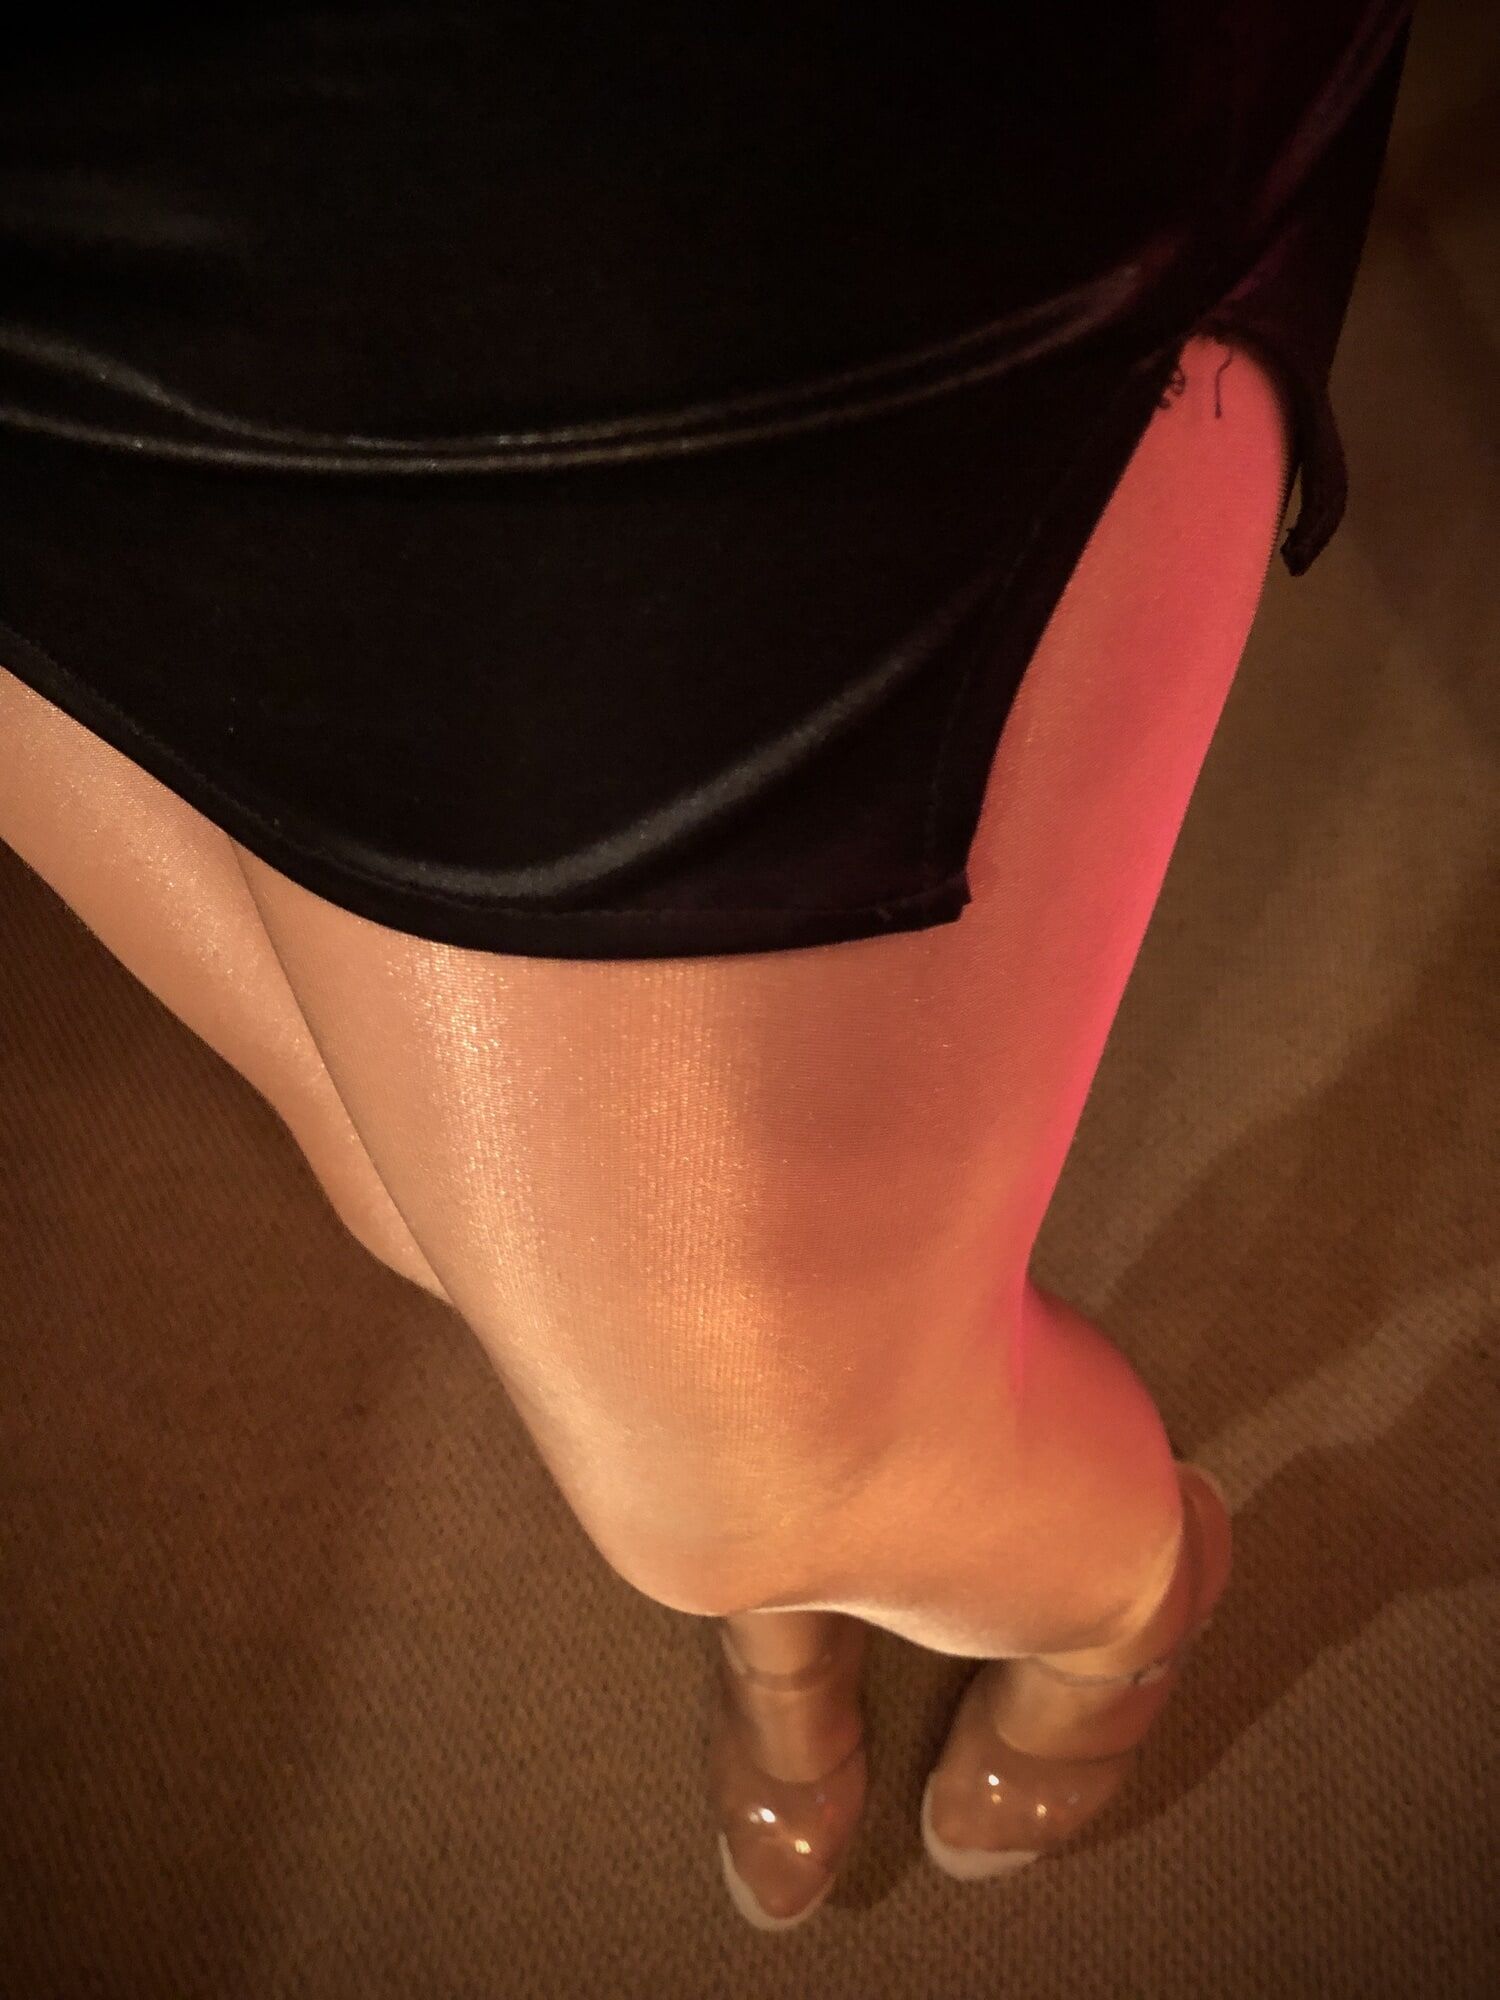 Would you like to lick my legs on this shiny glossy tights?